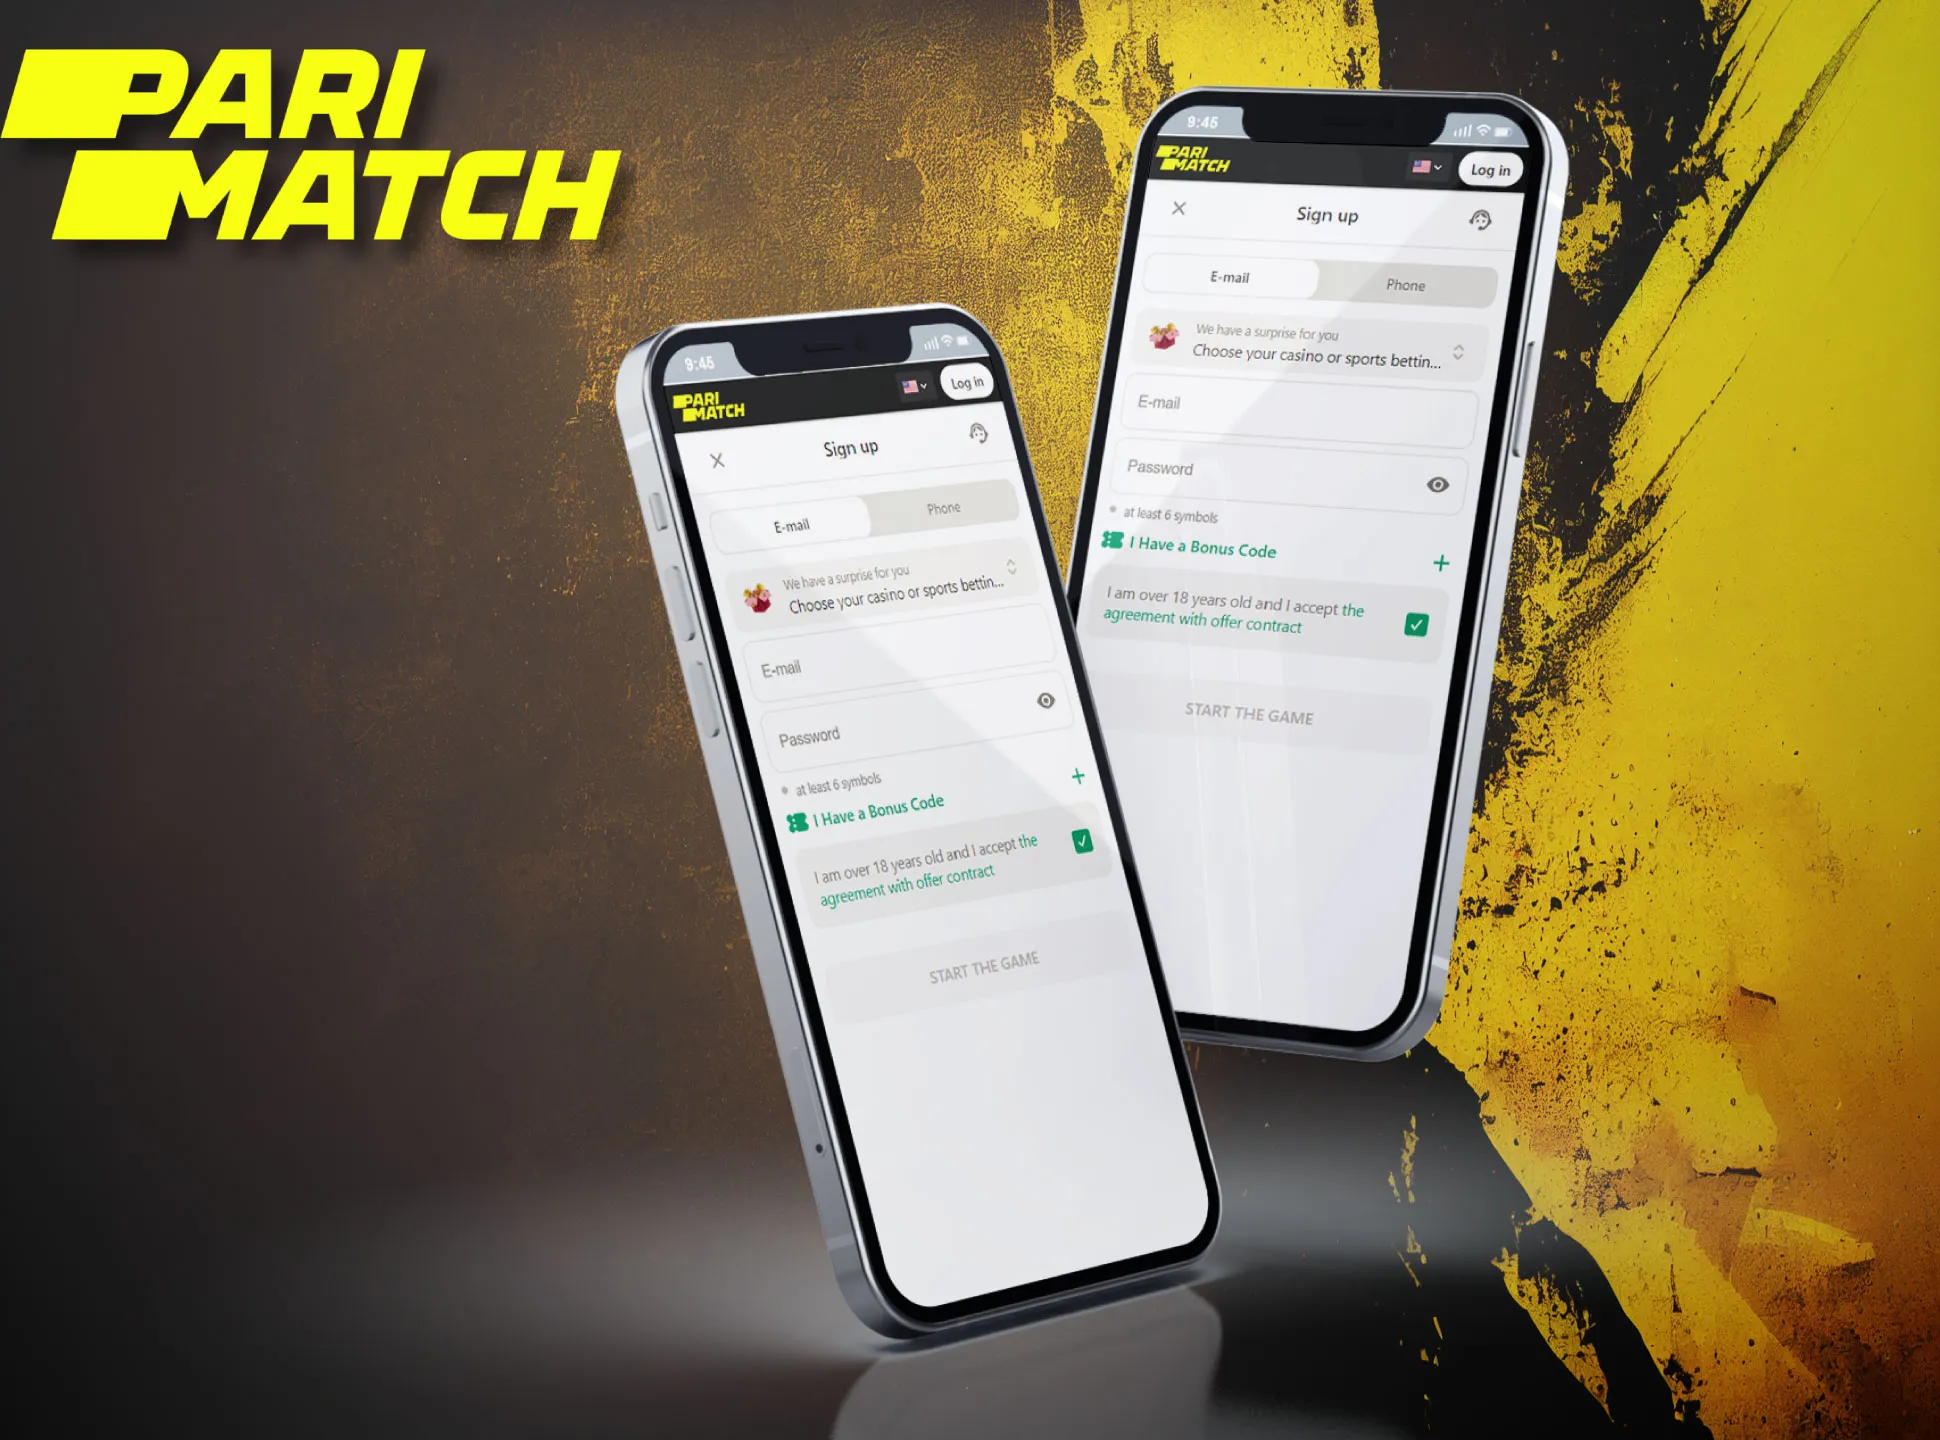 You can sign up for Parimatch in its mobile app.